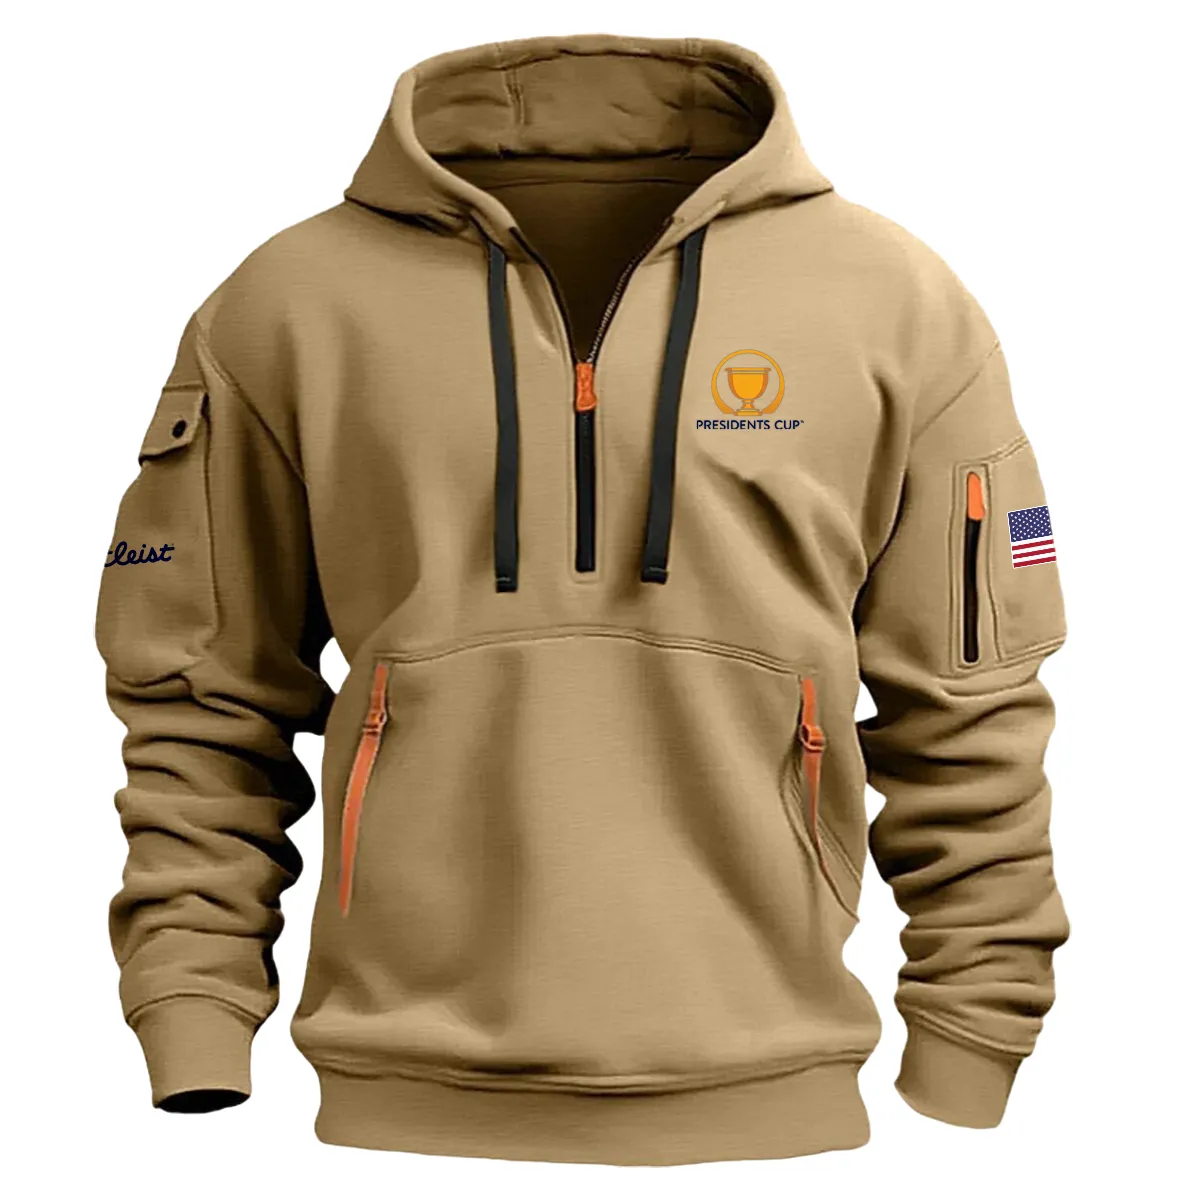 Khaki Color Titleist Fashion Hoodie Half Zipper Presidents Cup Gift For Fans